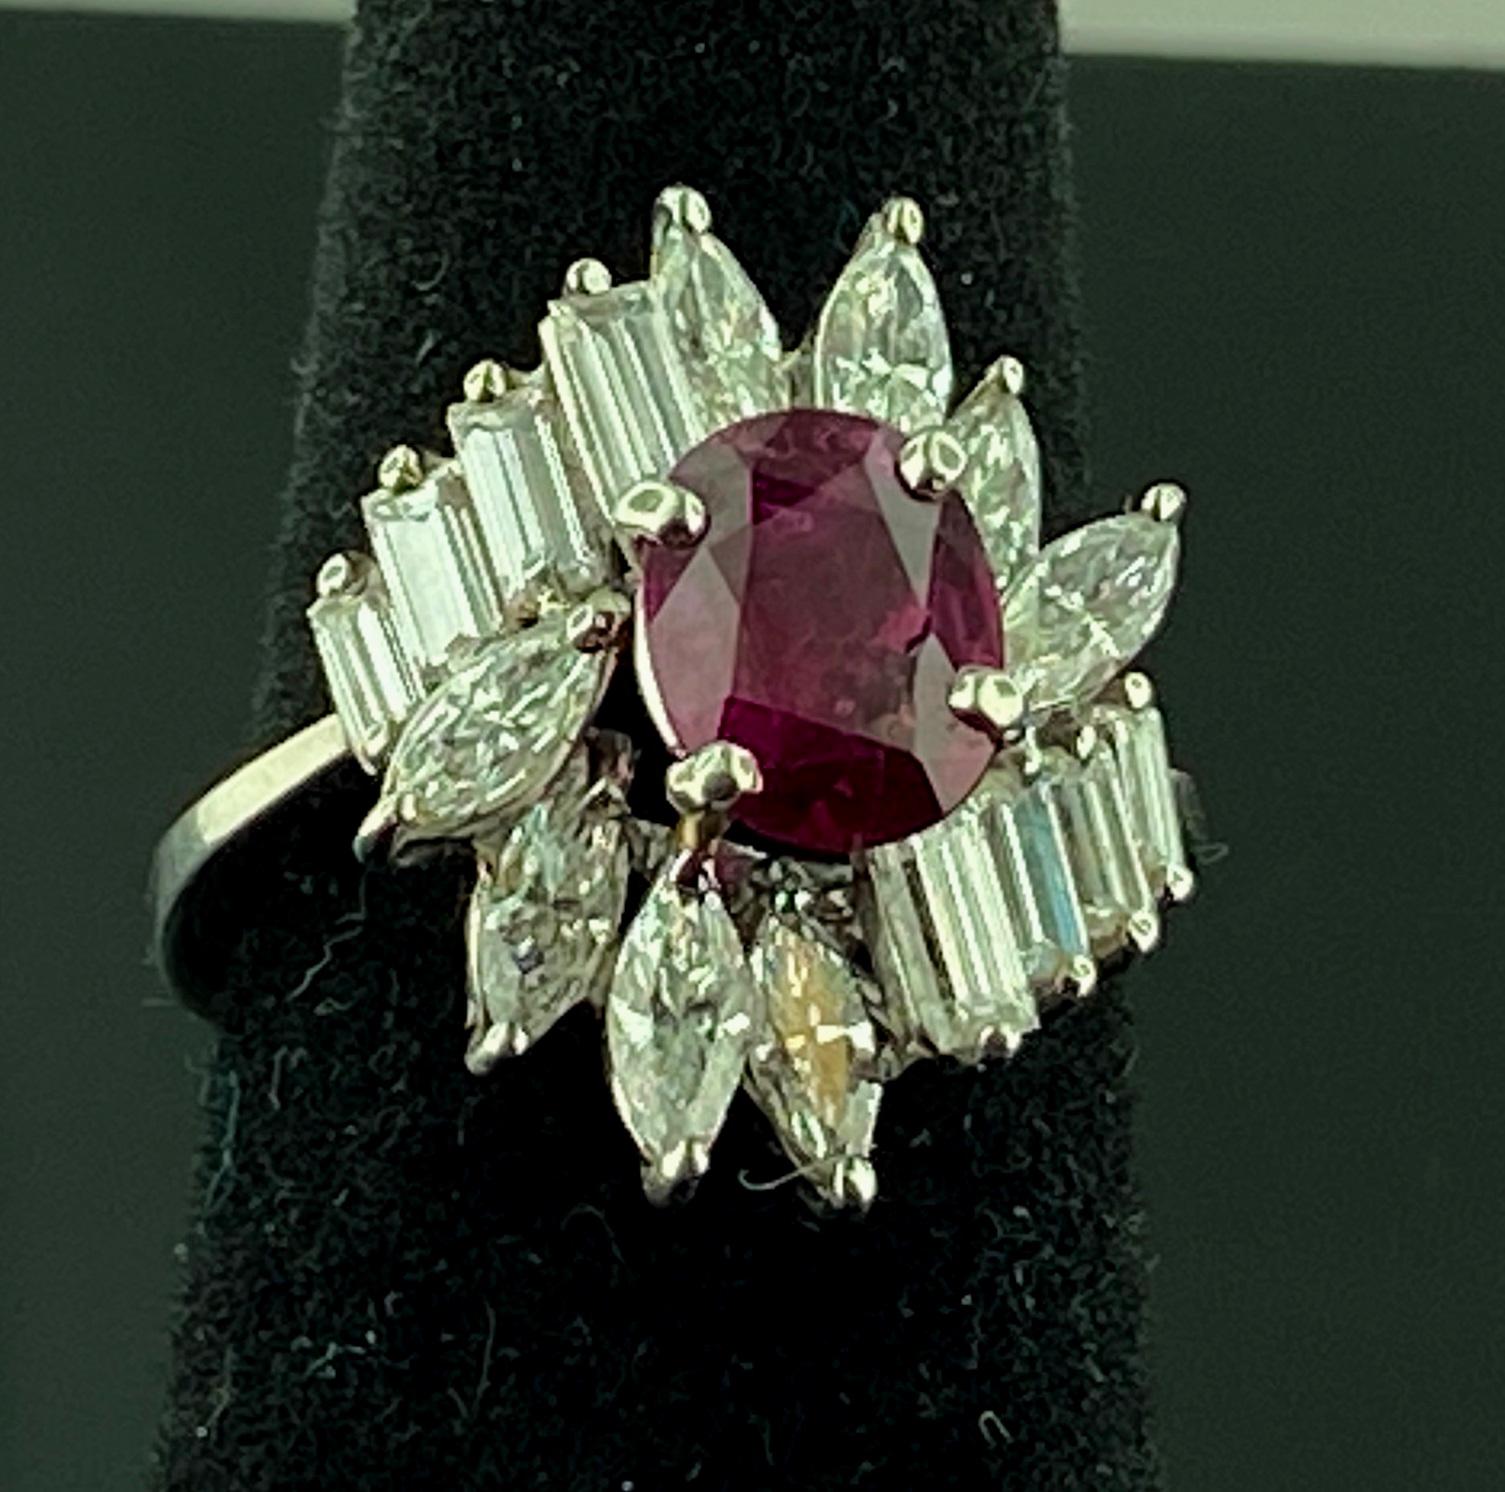 Set in Platinum is an Oval cut 1.00 carat Ruby in the center, surrounded with 8 Marquise cut diamonds weighing 1.25 carats and 8 baguette cut diamonds weighing 0.75 carats.  Total diamond weight is 2.00 carats.  Ring size is 6.25.